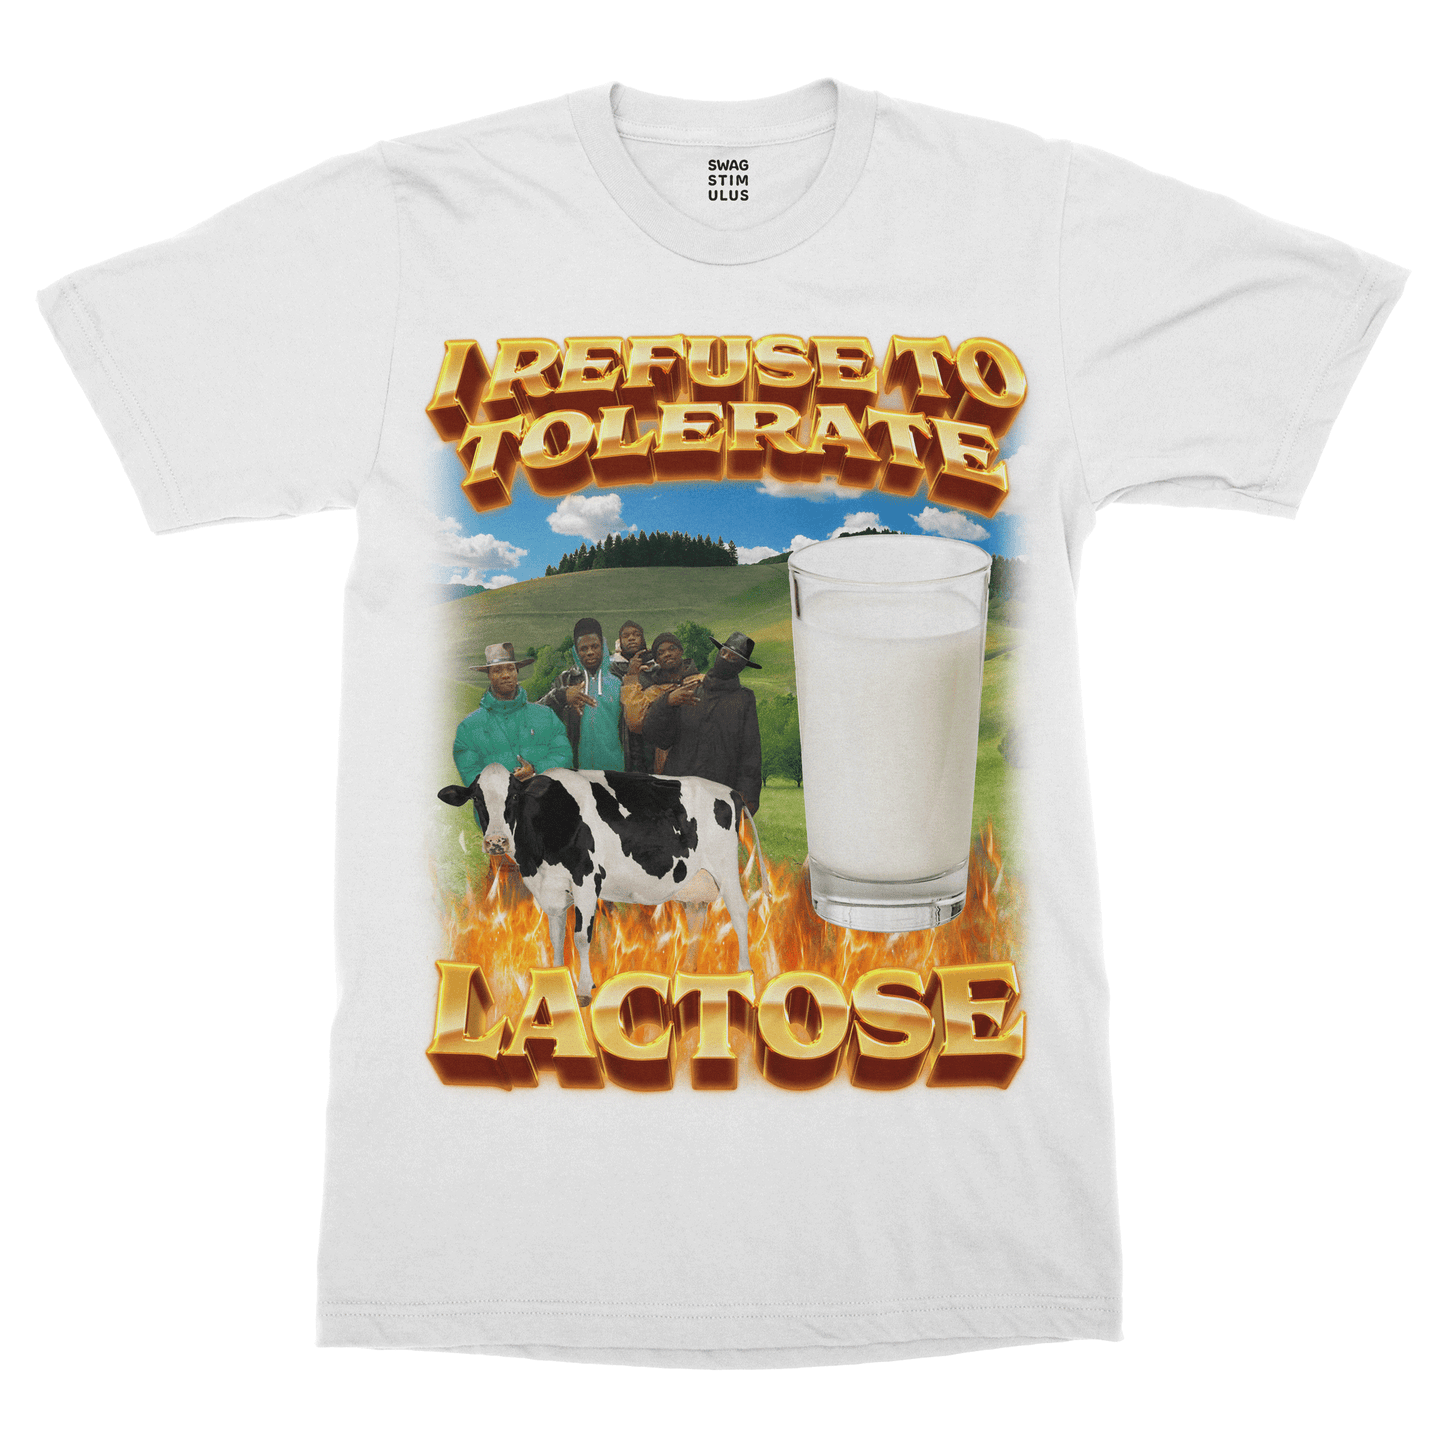 I Refuse to Tolerate Lactose T-Shirt